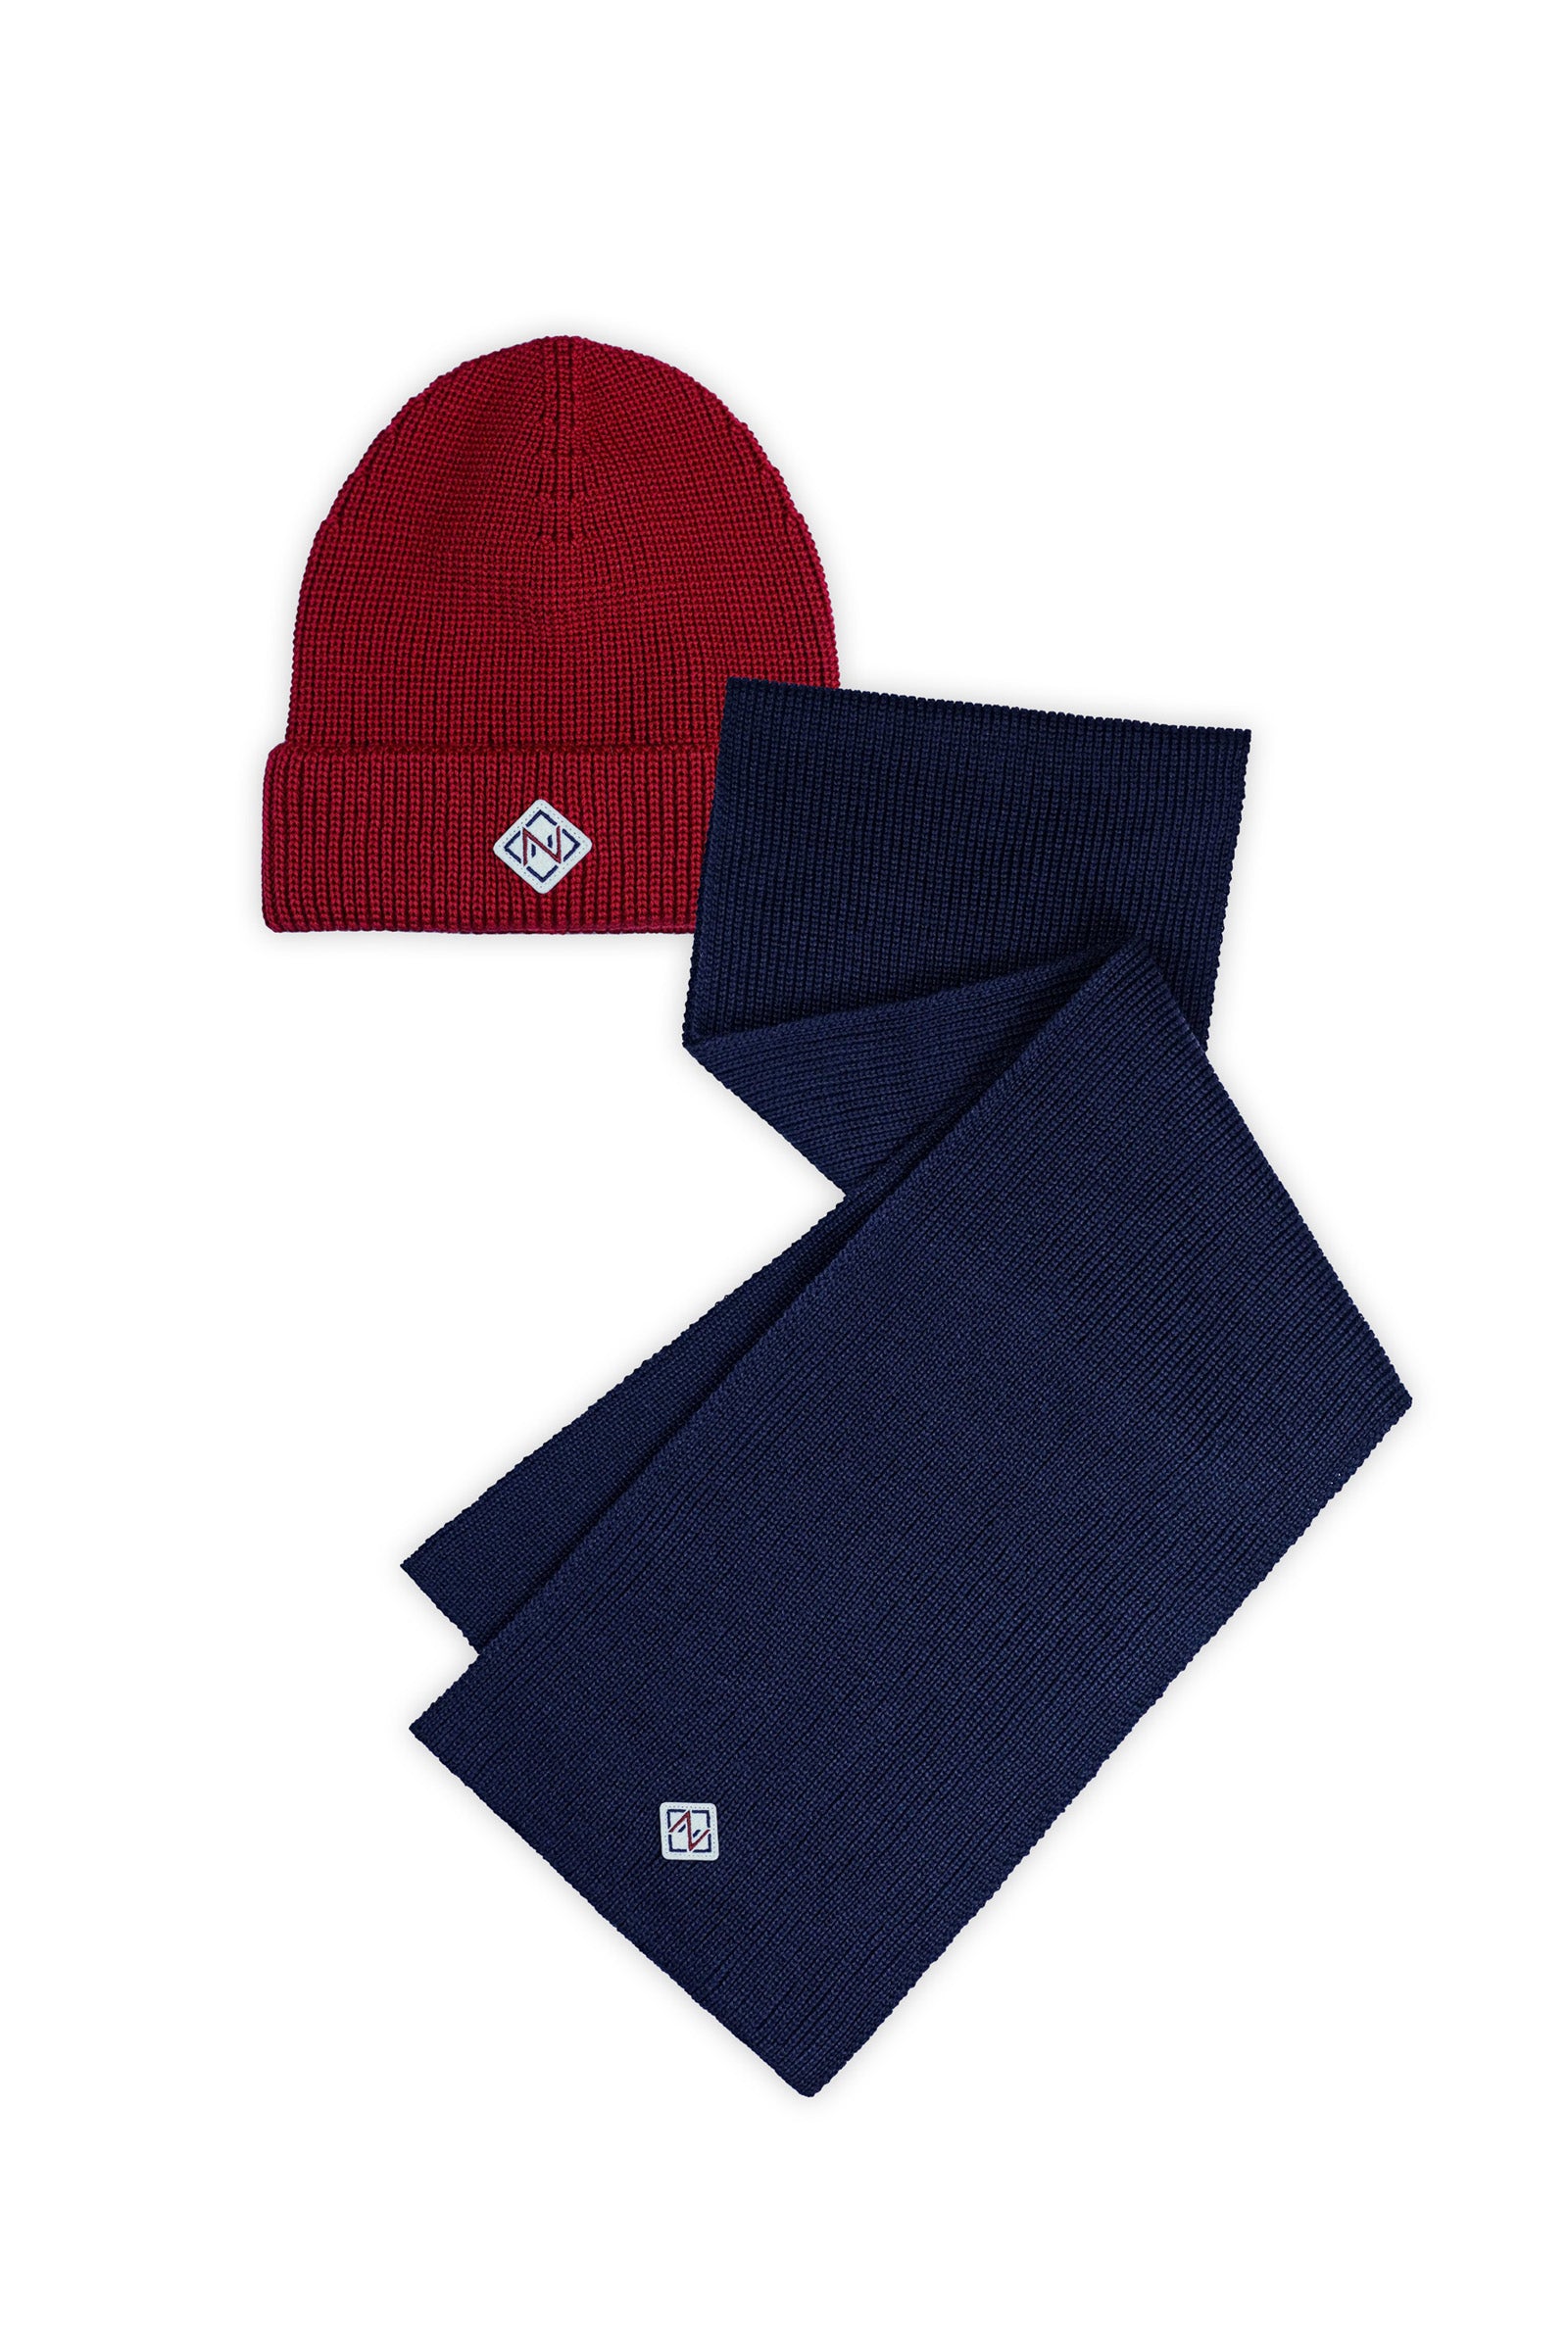 RED HAT & NAVY SCARF